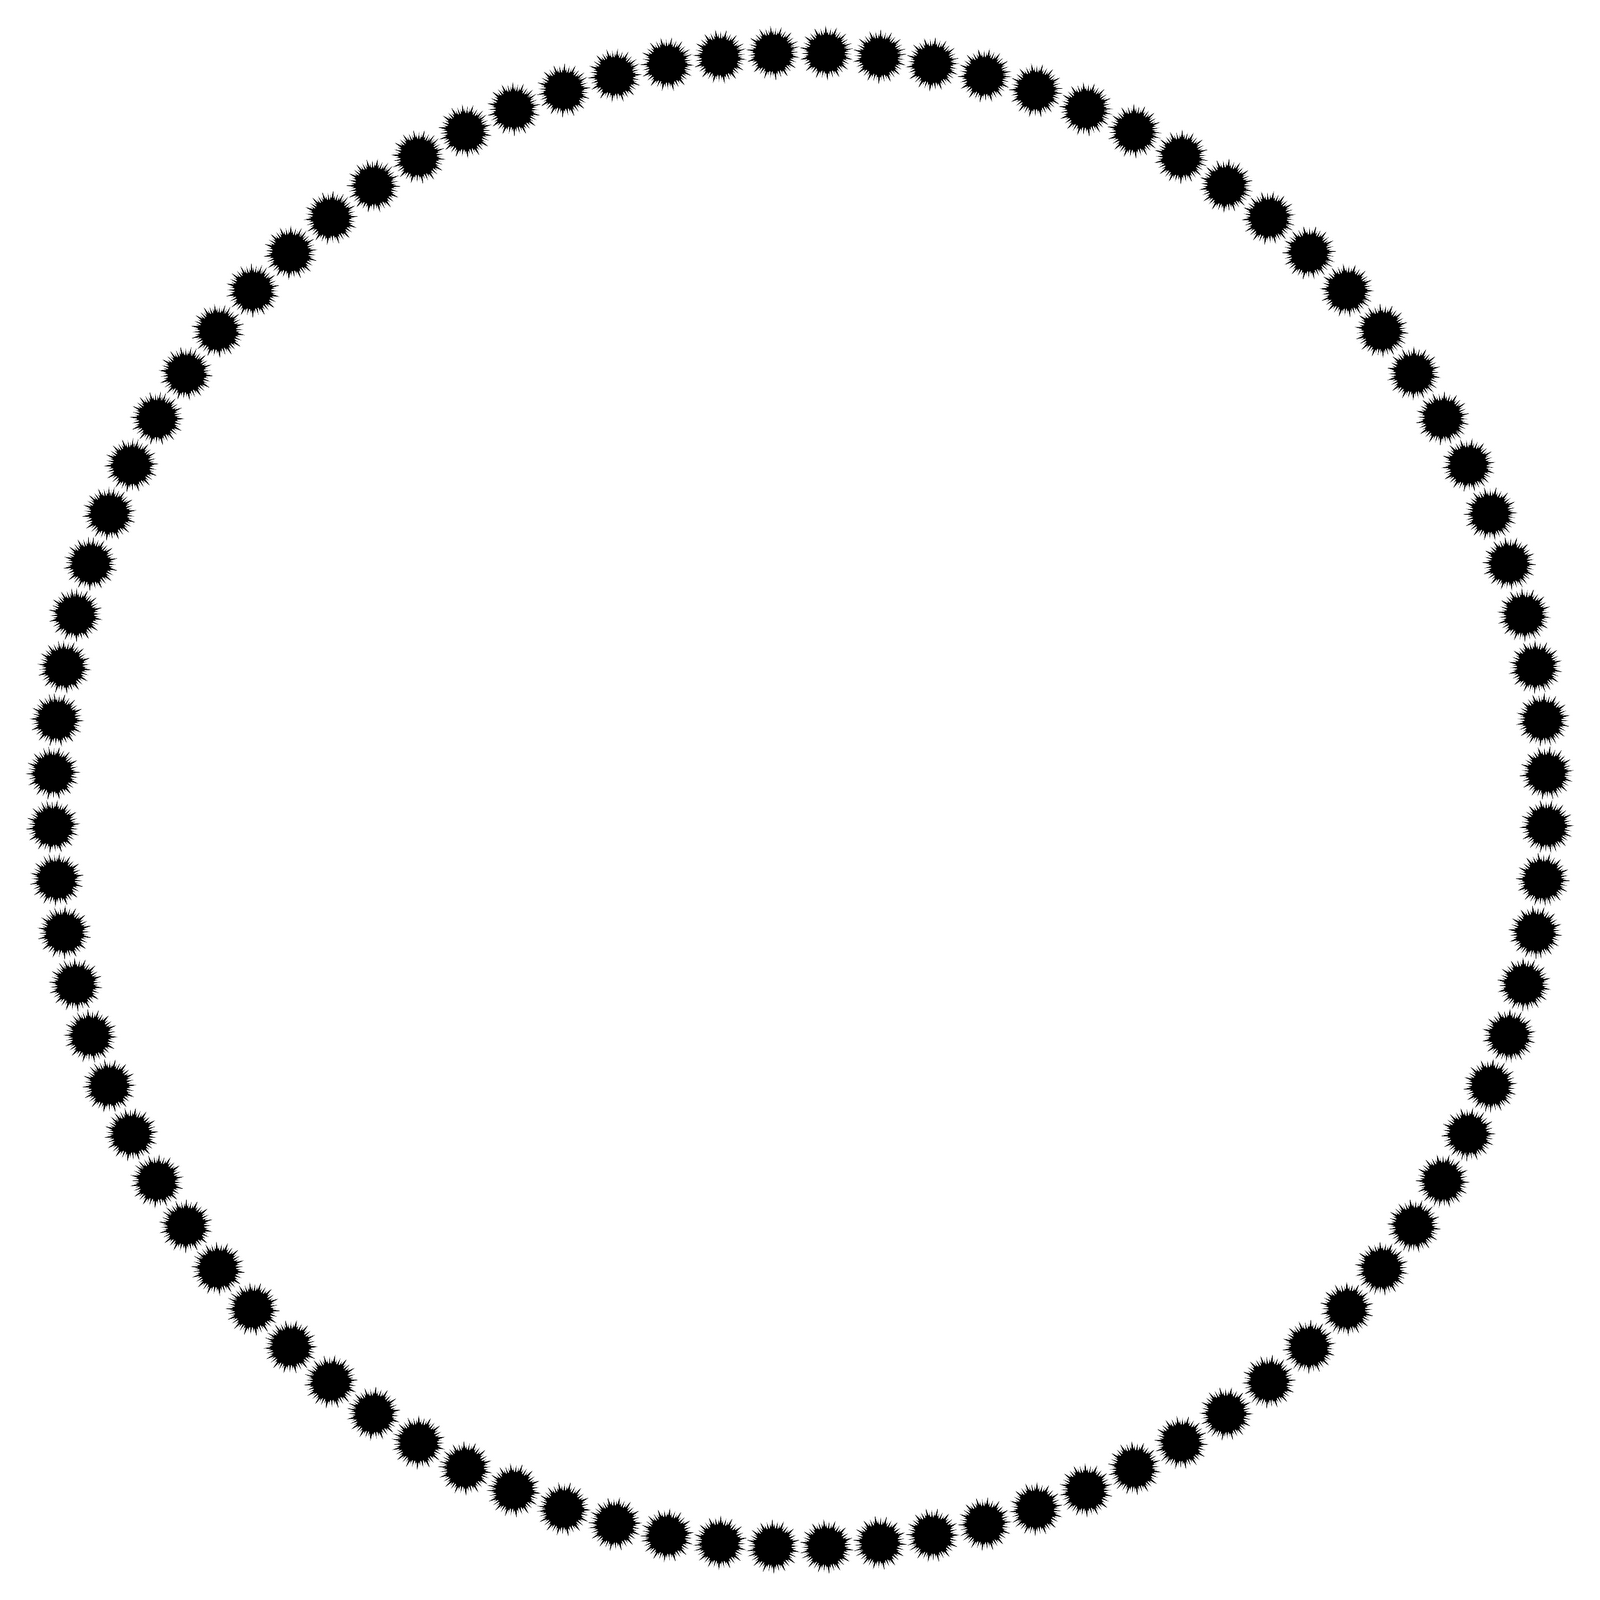 72 Images Of Circle Border Clip Art   You Can Use These Free Cliparts